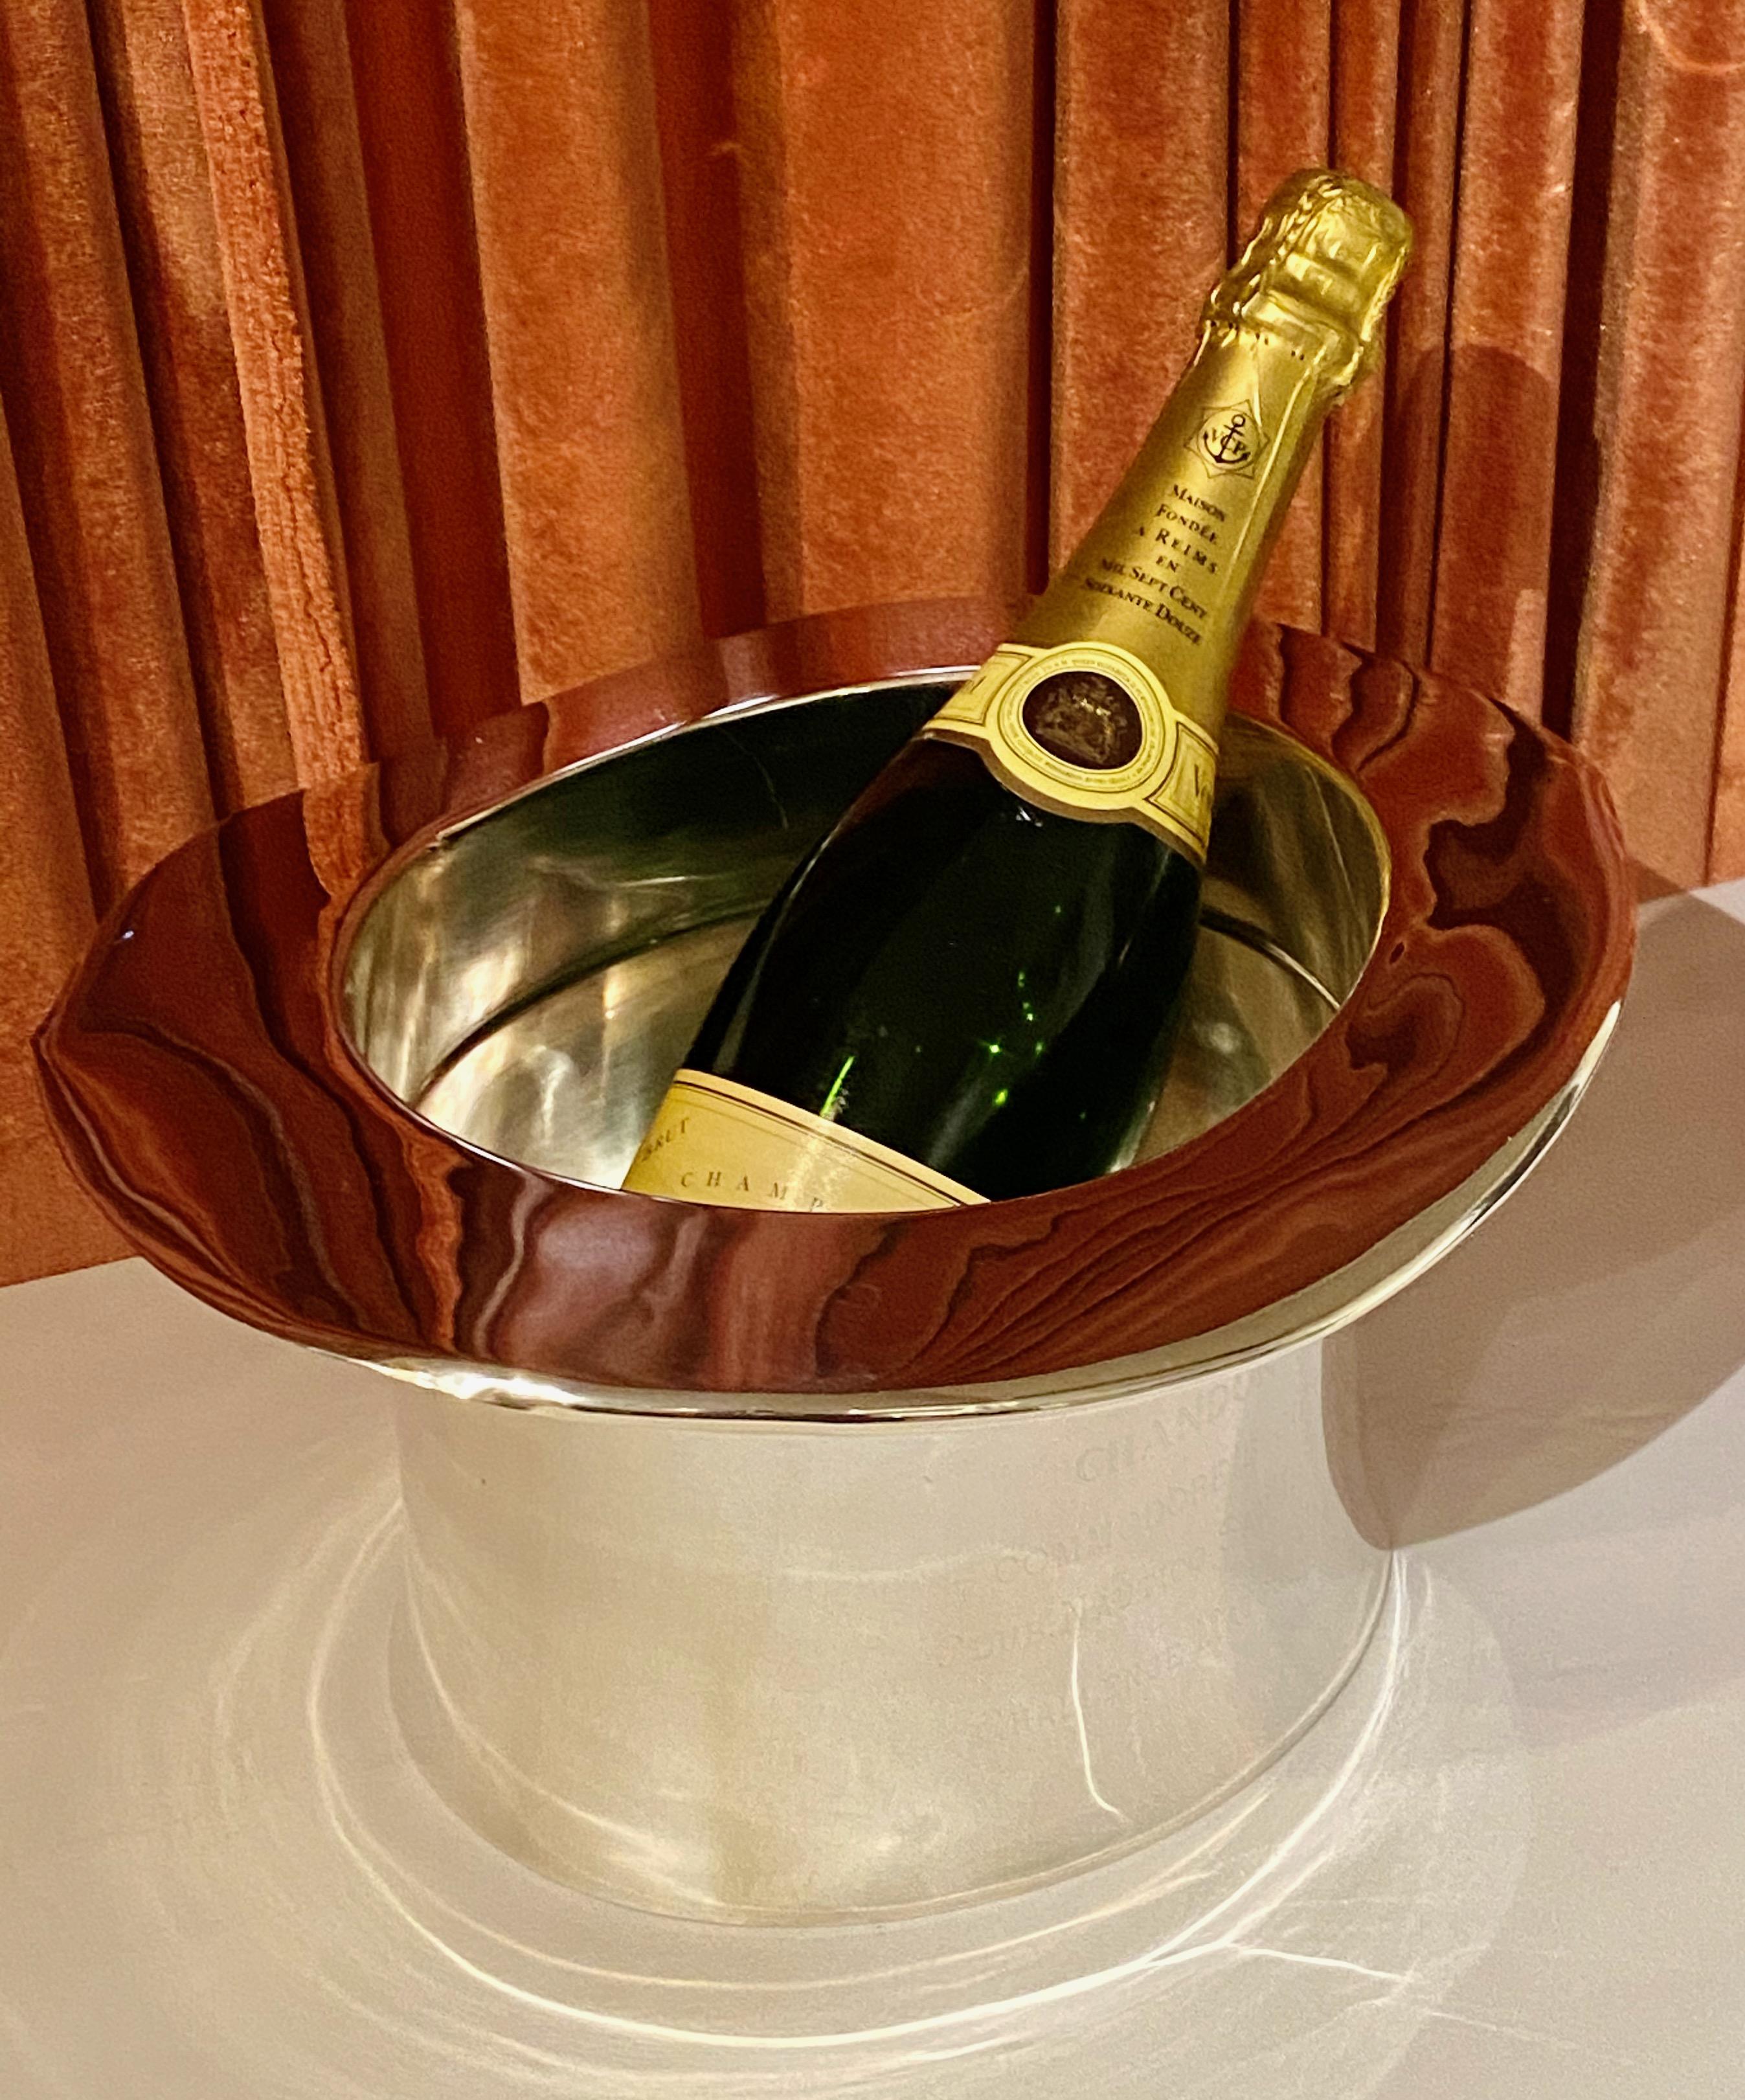 This silver-plated top hat champagne ice bucket combines elegance with a touch of humor. What could be more iconic, more Art Deco than something that conjures up a Fred Astaire and Ginger Rogers movie? Fanciful and practical, this will be something